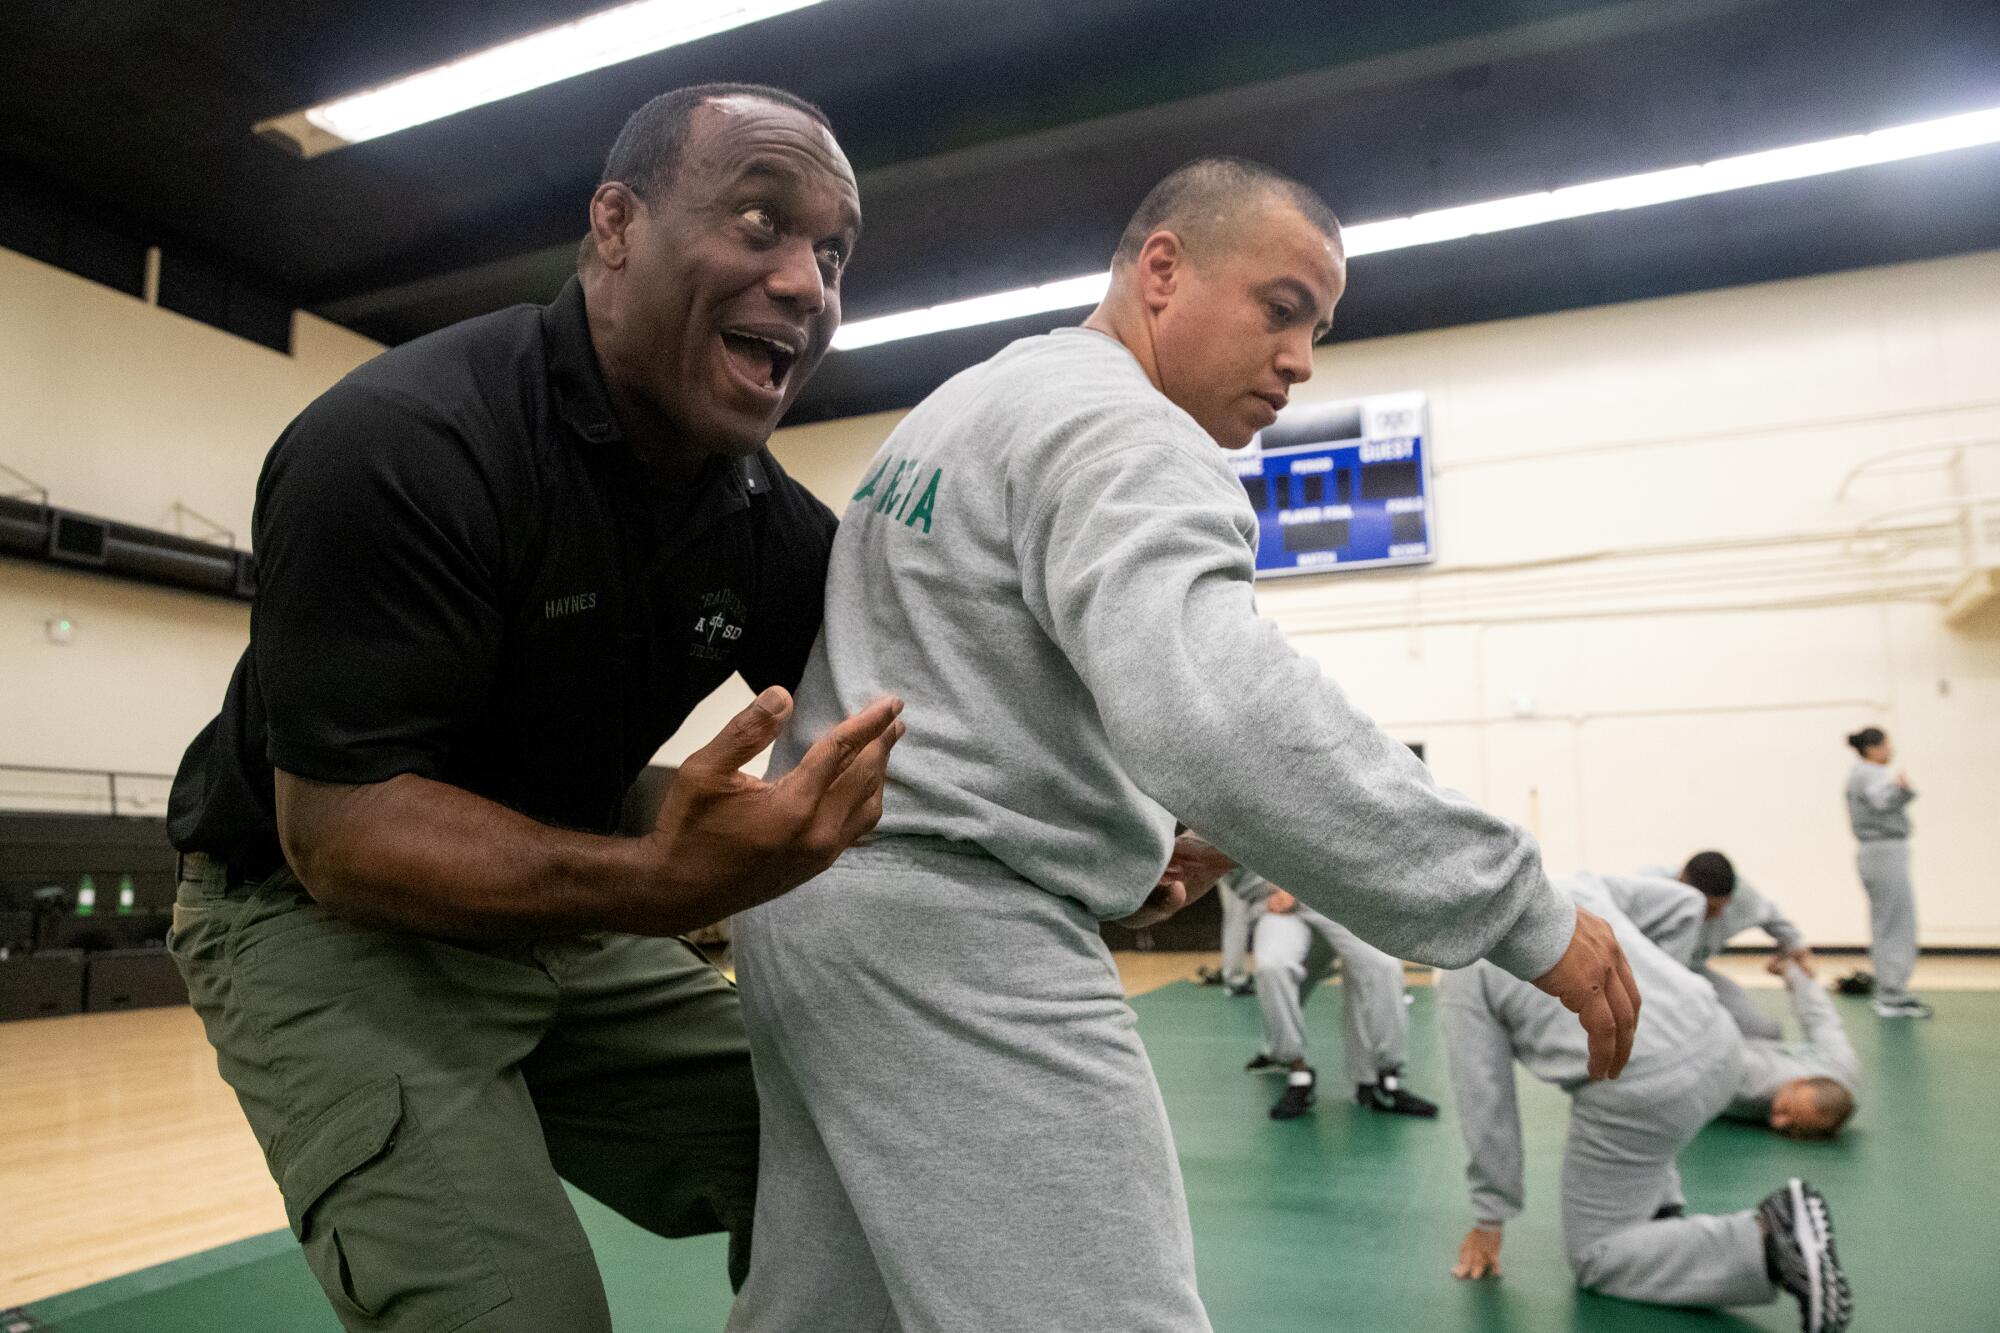 Recruits go through a defensive tactics class at STARS Center in Whittier.